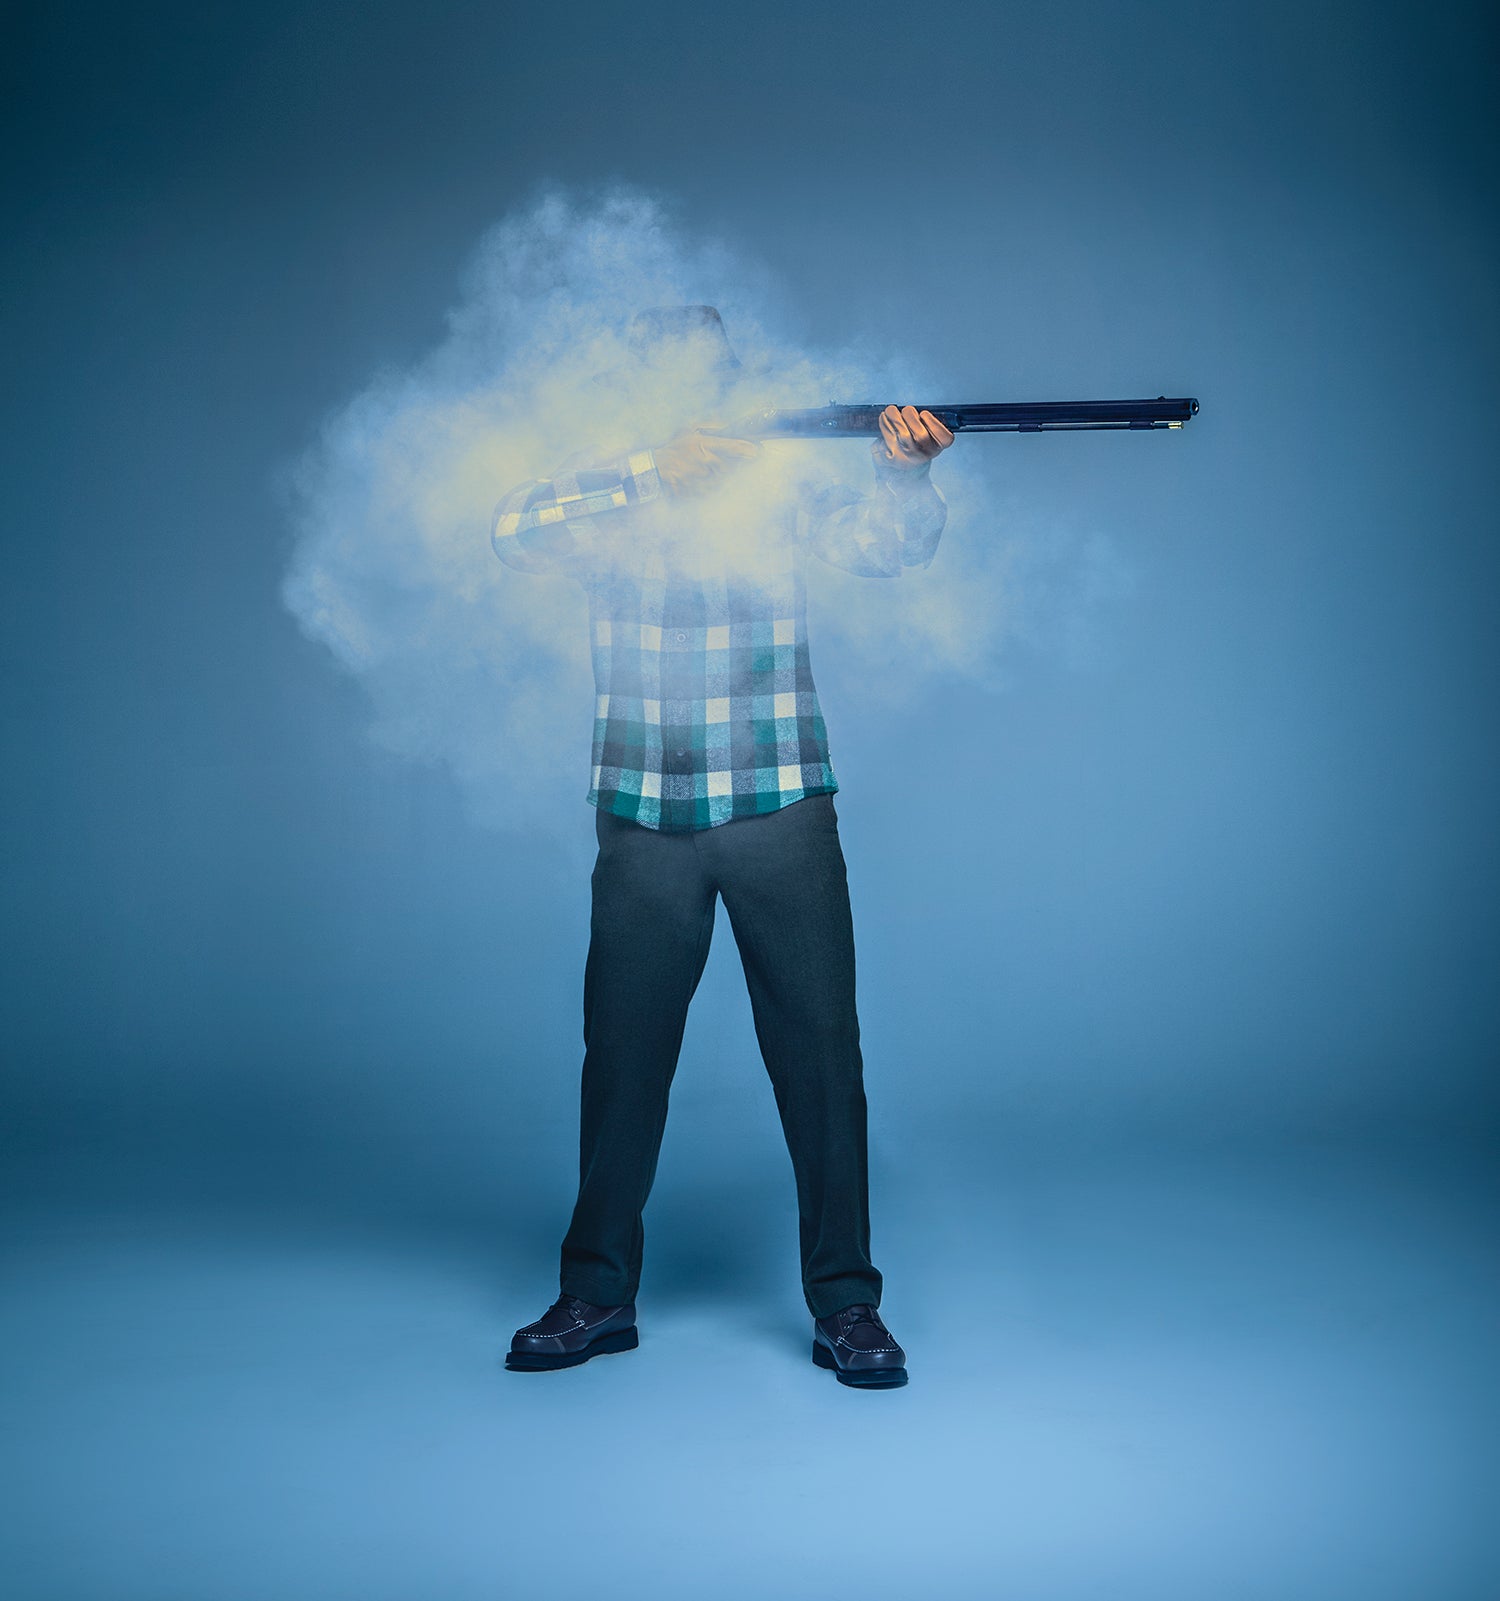 man in plaid shirt holds gun and is obscured by puff of gunsmoke